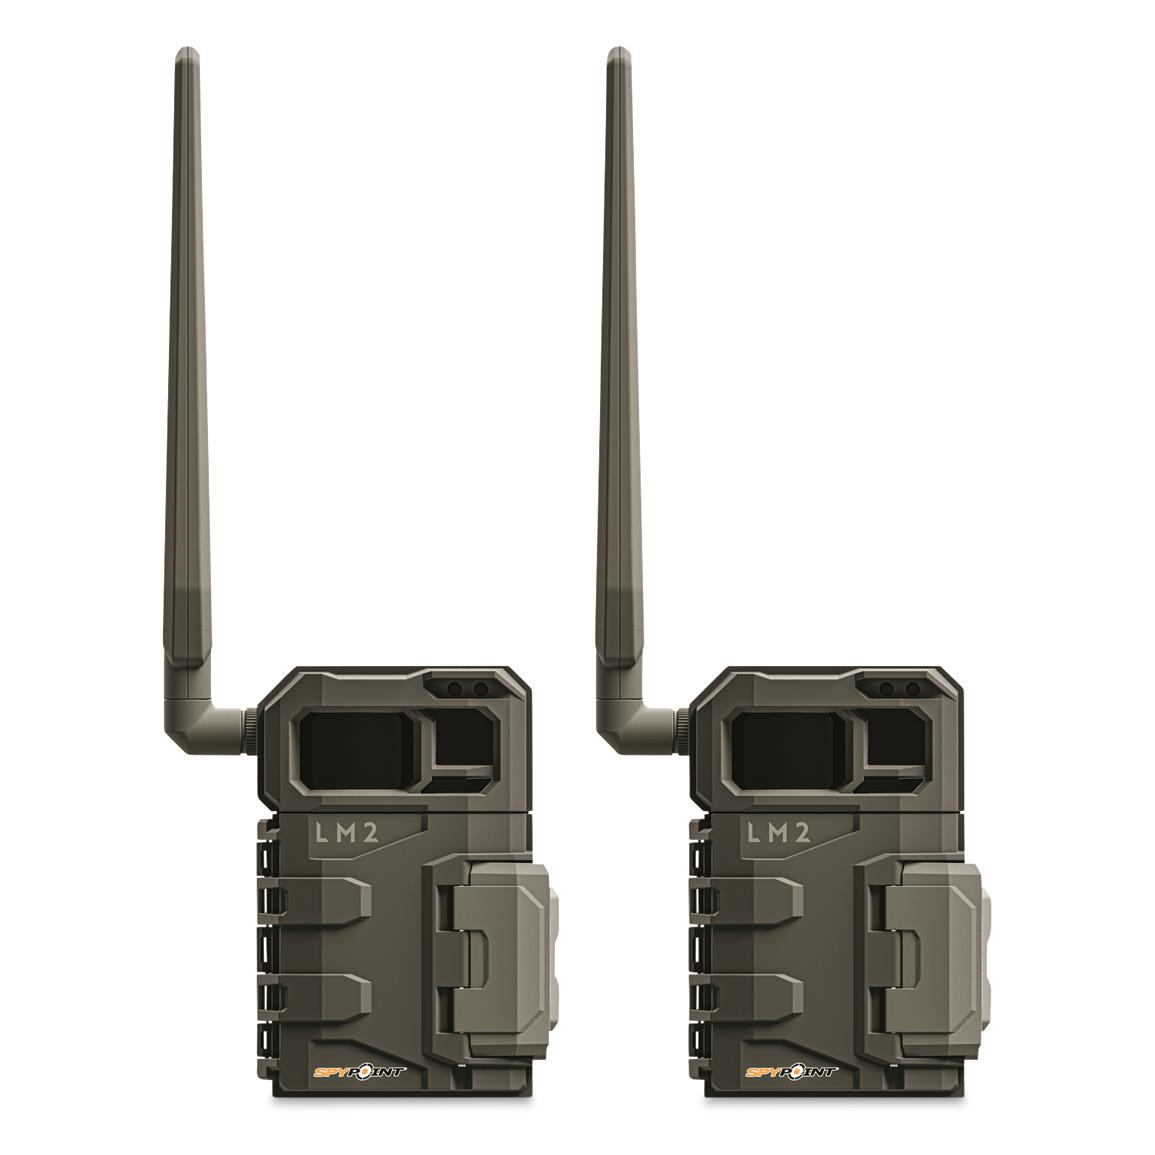 SPYPOINT LM2 Cellular Trail/Game Camera, 20MP, 2 Pack, Verizon